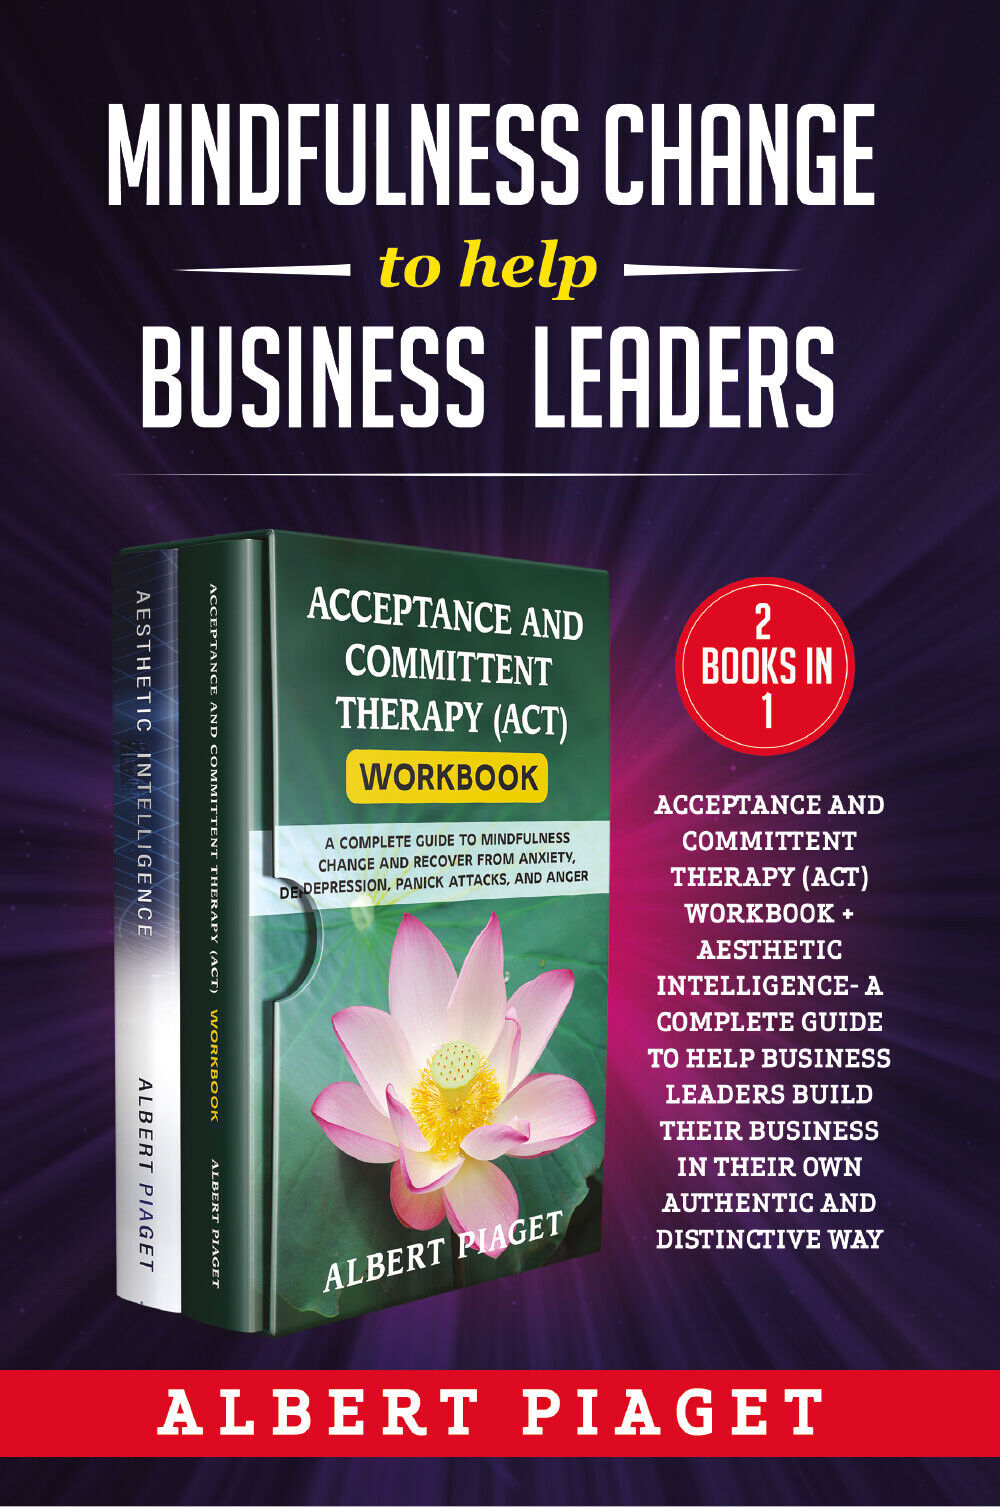 Mindfulness change to help business leaders (2 Books in 1). Acceptance and commi libro usato